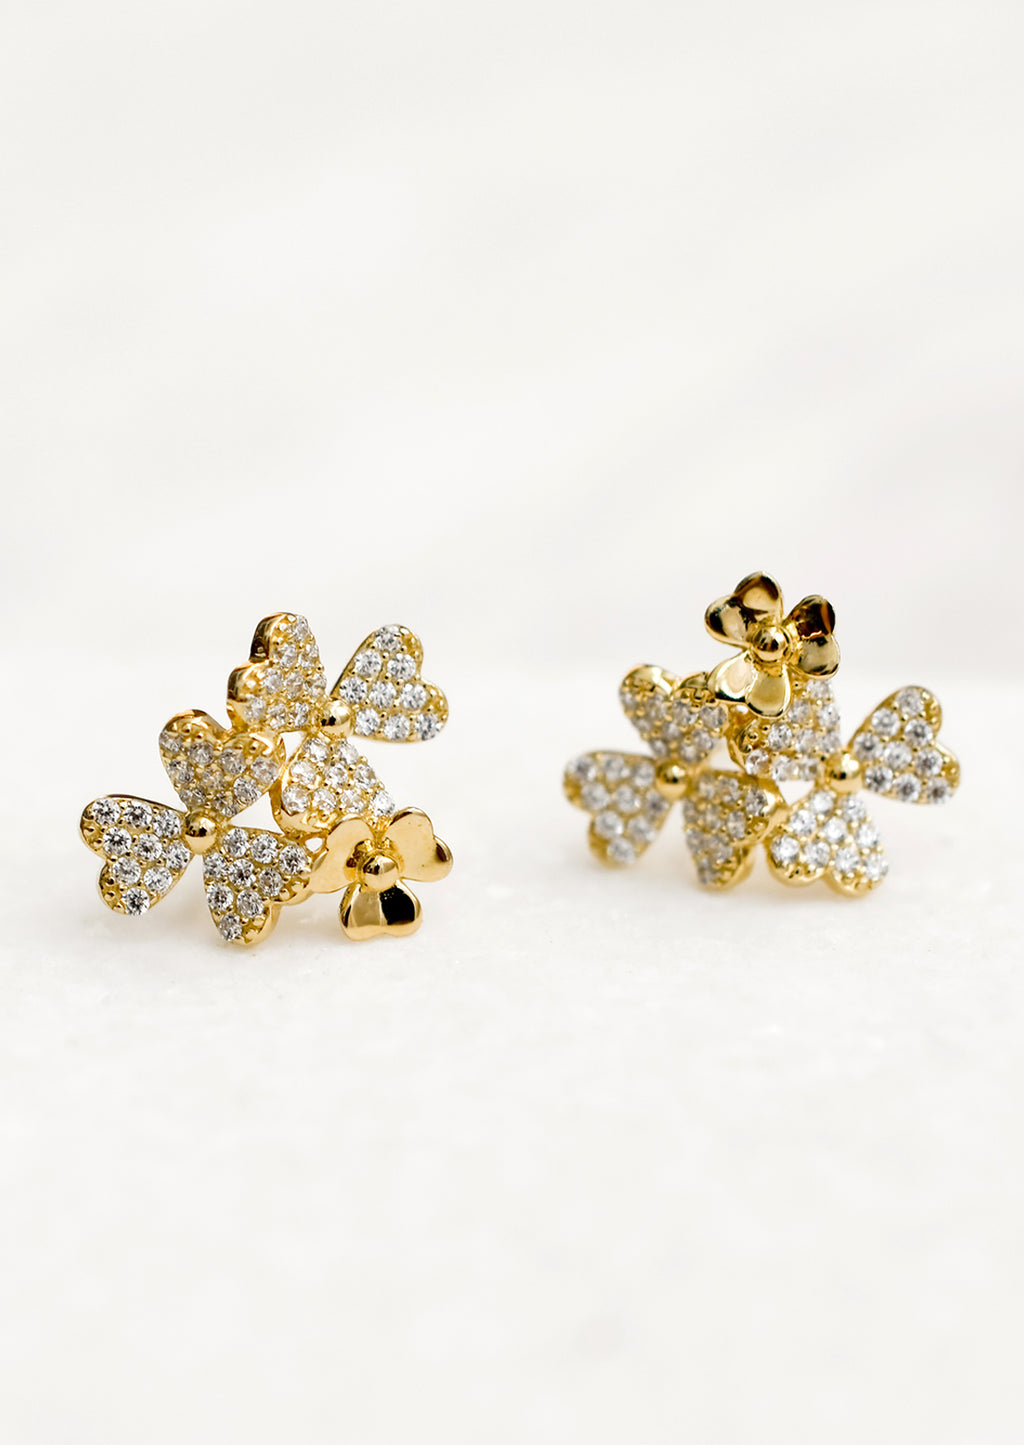 1: Gold stud earrings in shape of three flower cluster with clear crystals.